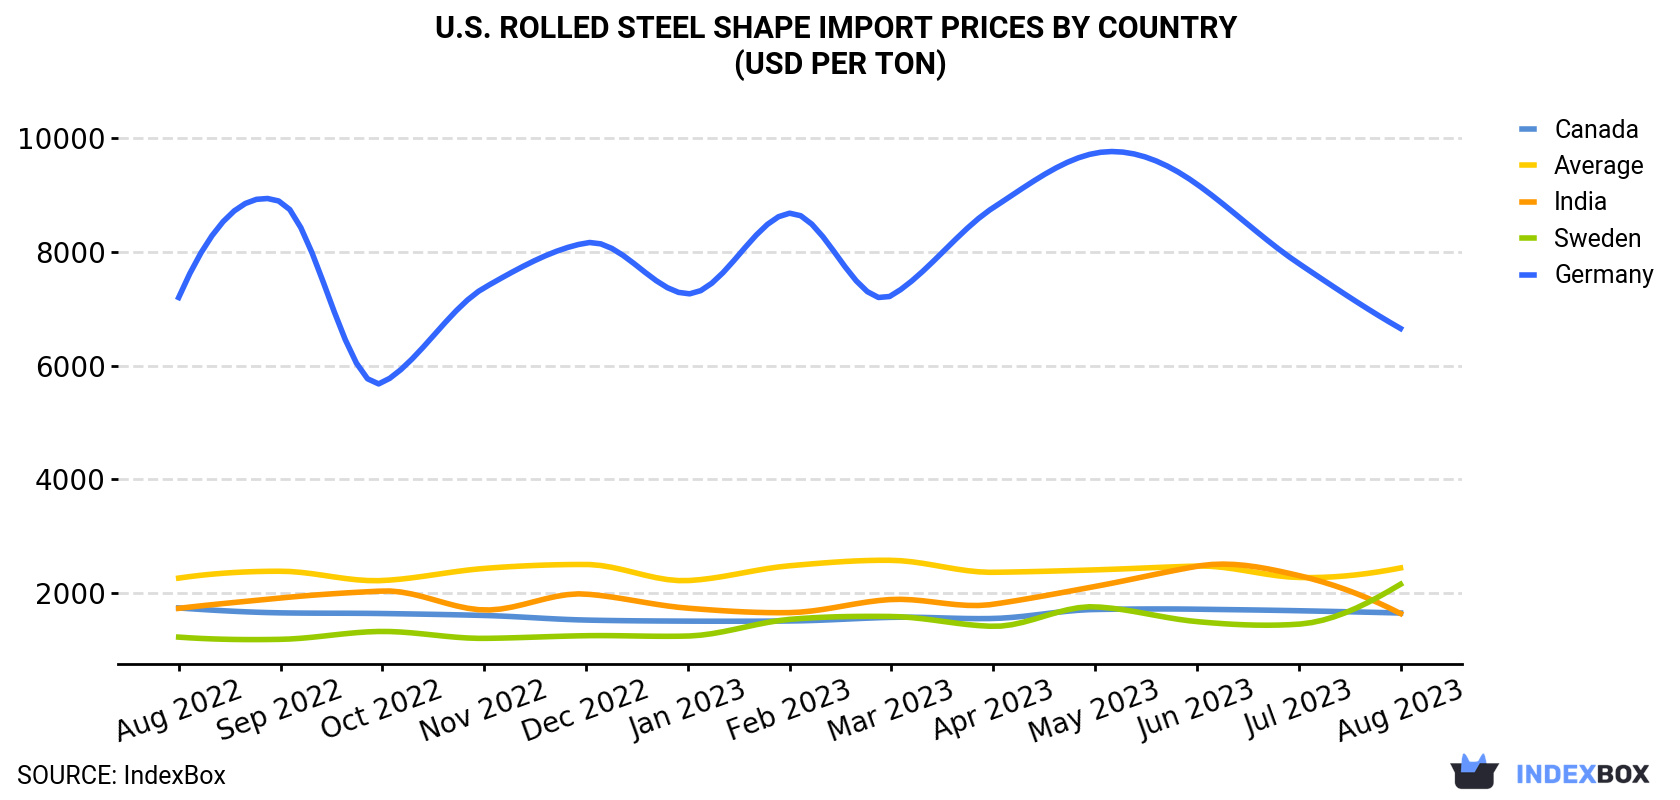 U.S. Rolled Steel Shape Import Prices By Country (USD Per Ton)